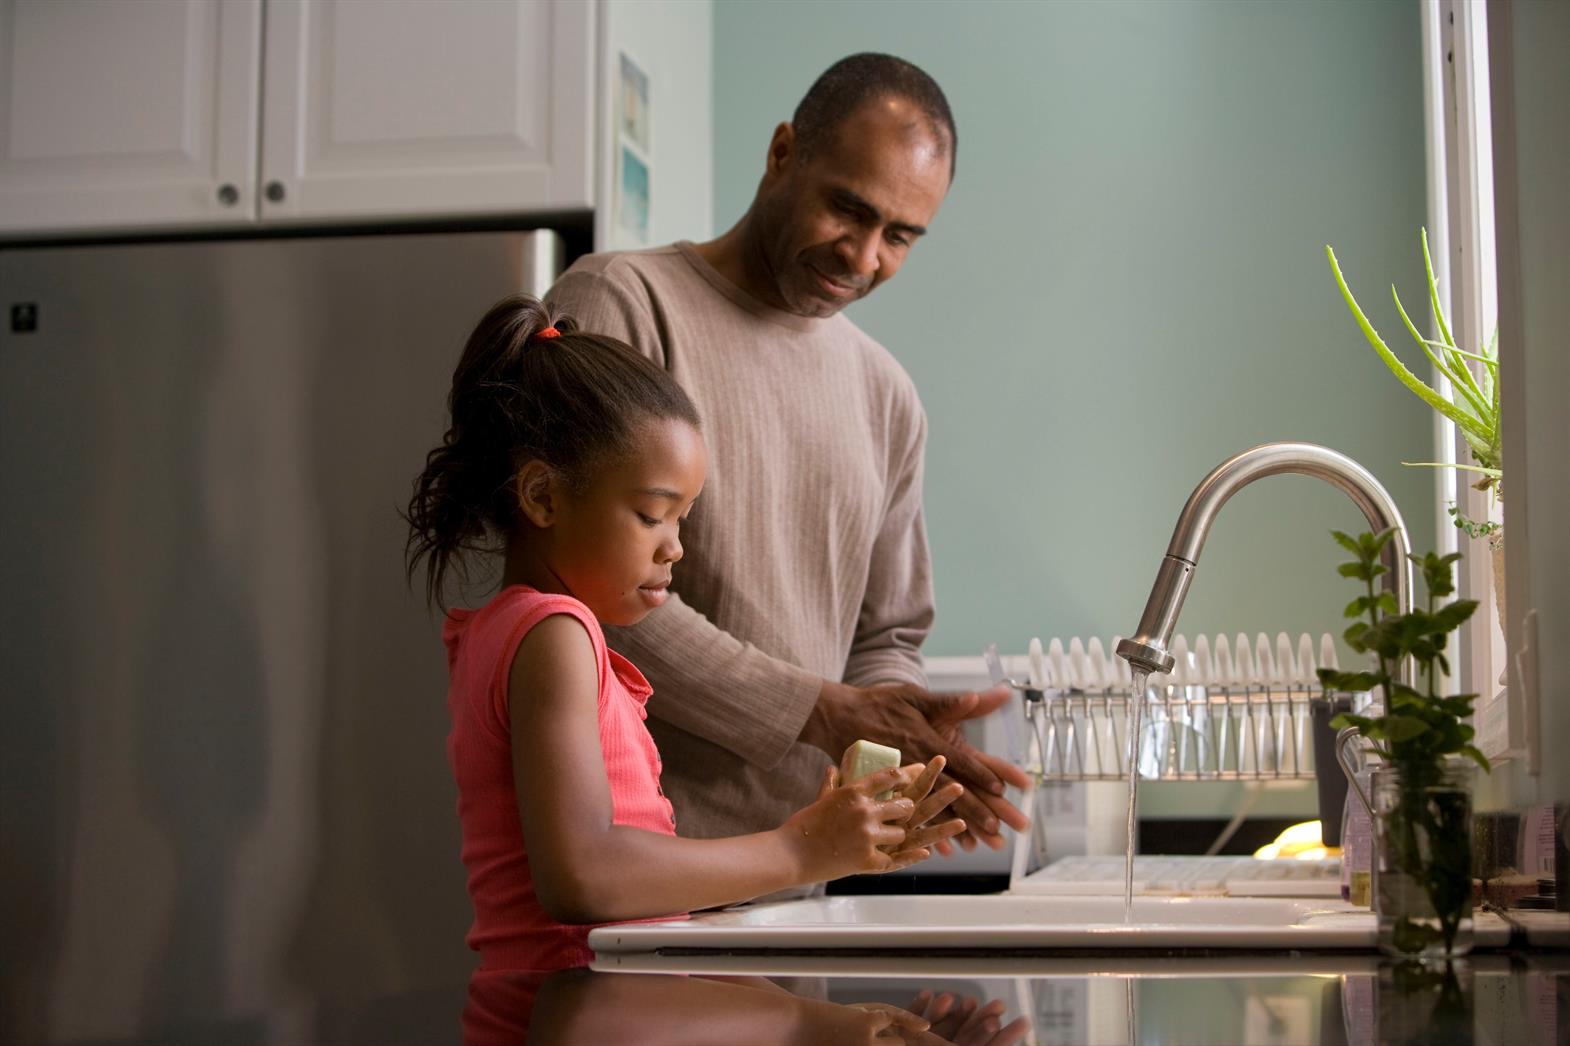 A father watching his daughter wash her hands by a kitchen sink